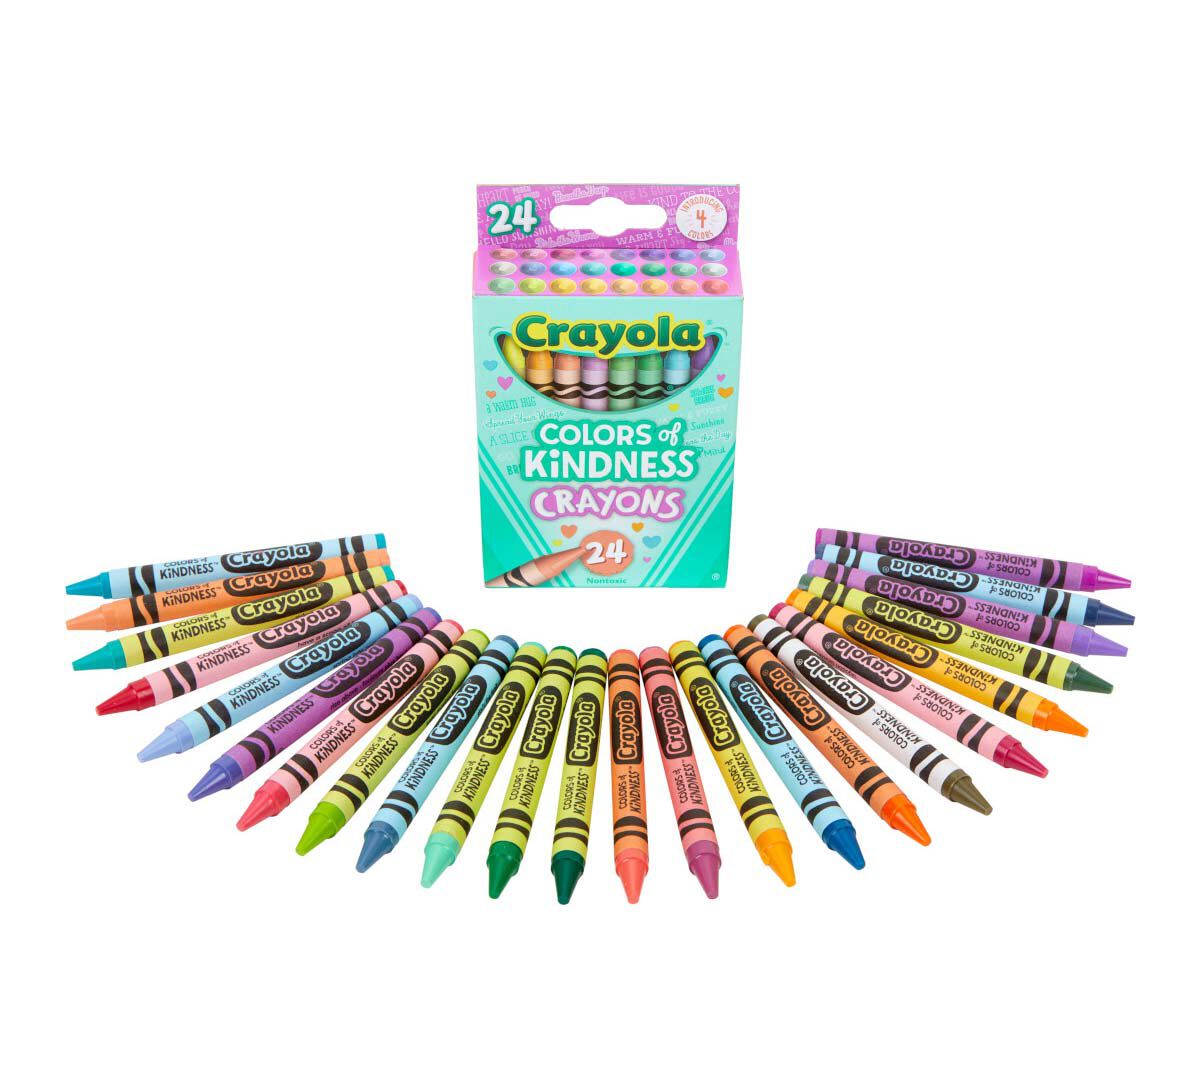 Crayola Colour Of Kindness 24 Pack Crayons